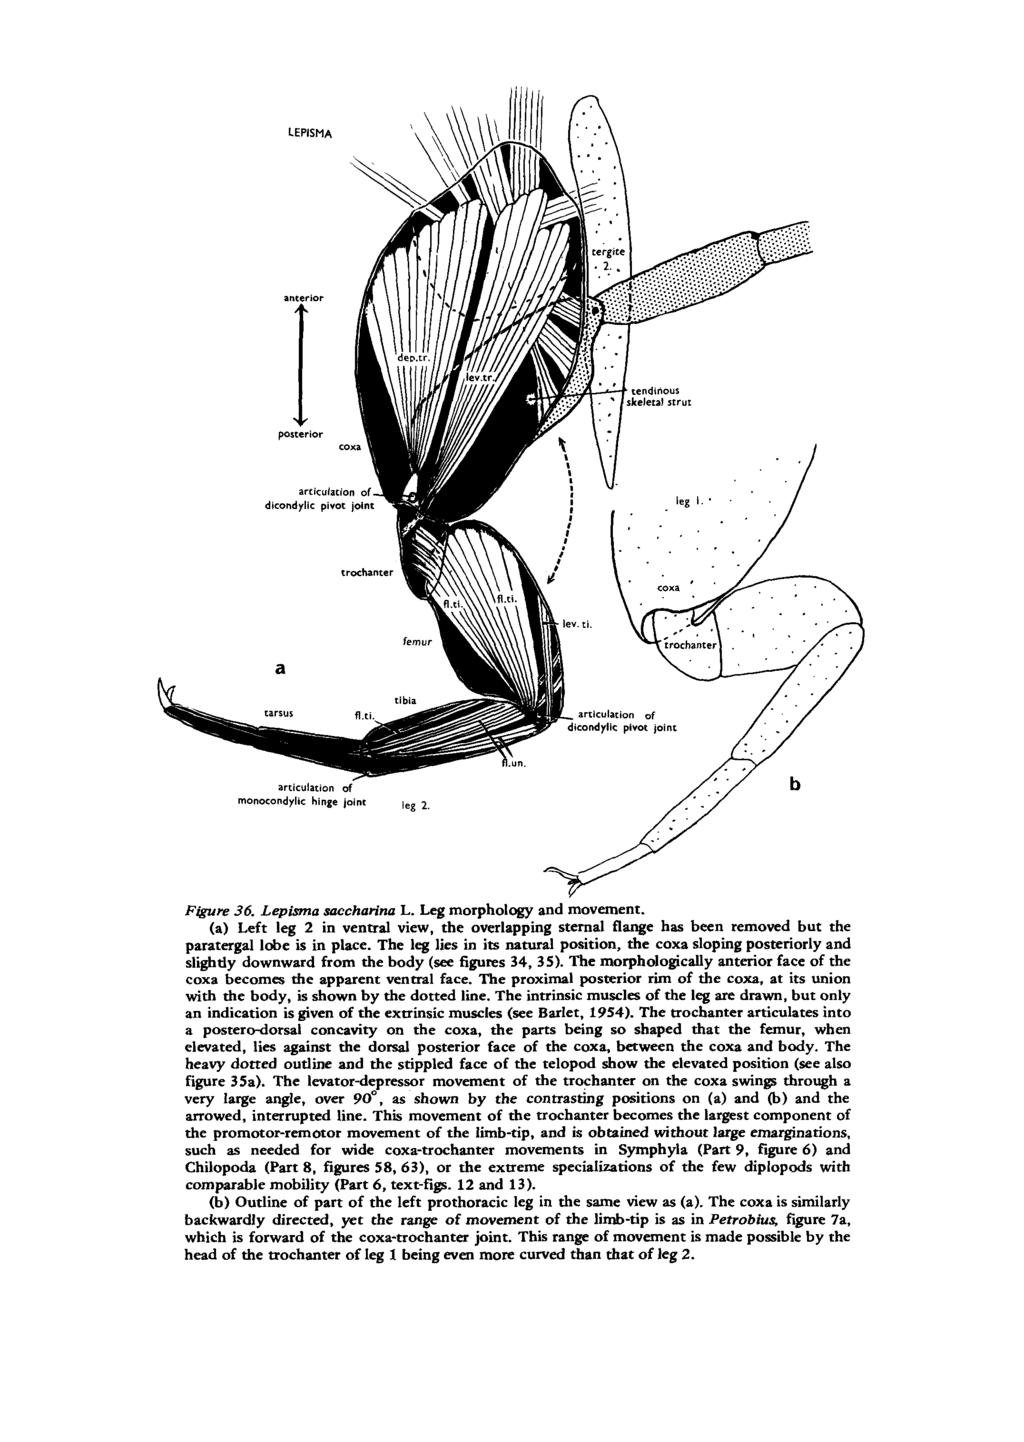 Figure 36. Lepisma saccharinn L. Leg morphology and movement. (a) Left leg 2 in ventral view, the overlapping sternal flange has been removed but the paratergal Lobe is in place.